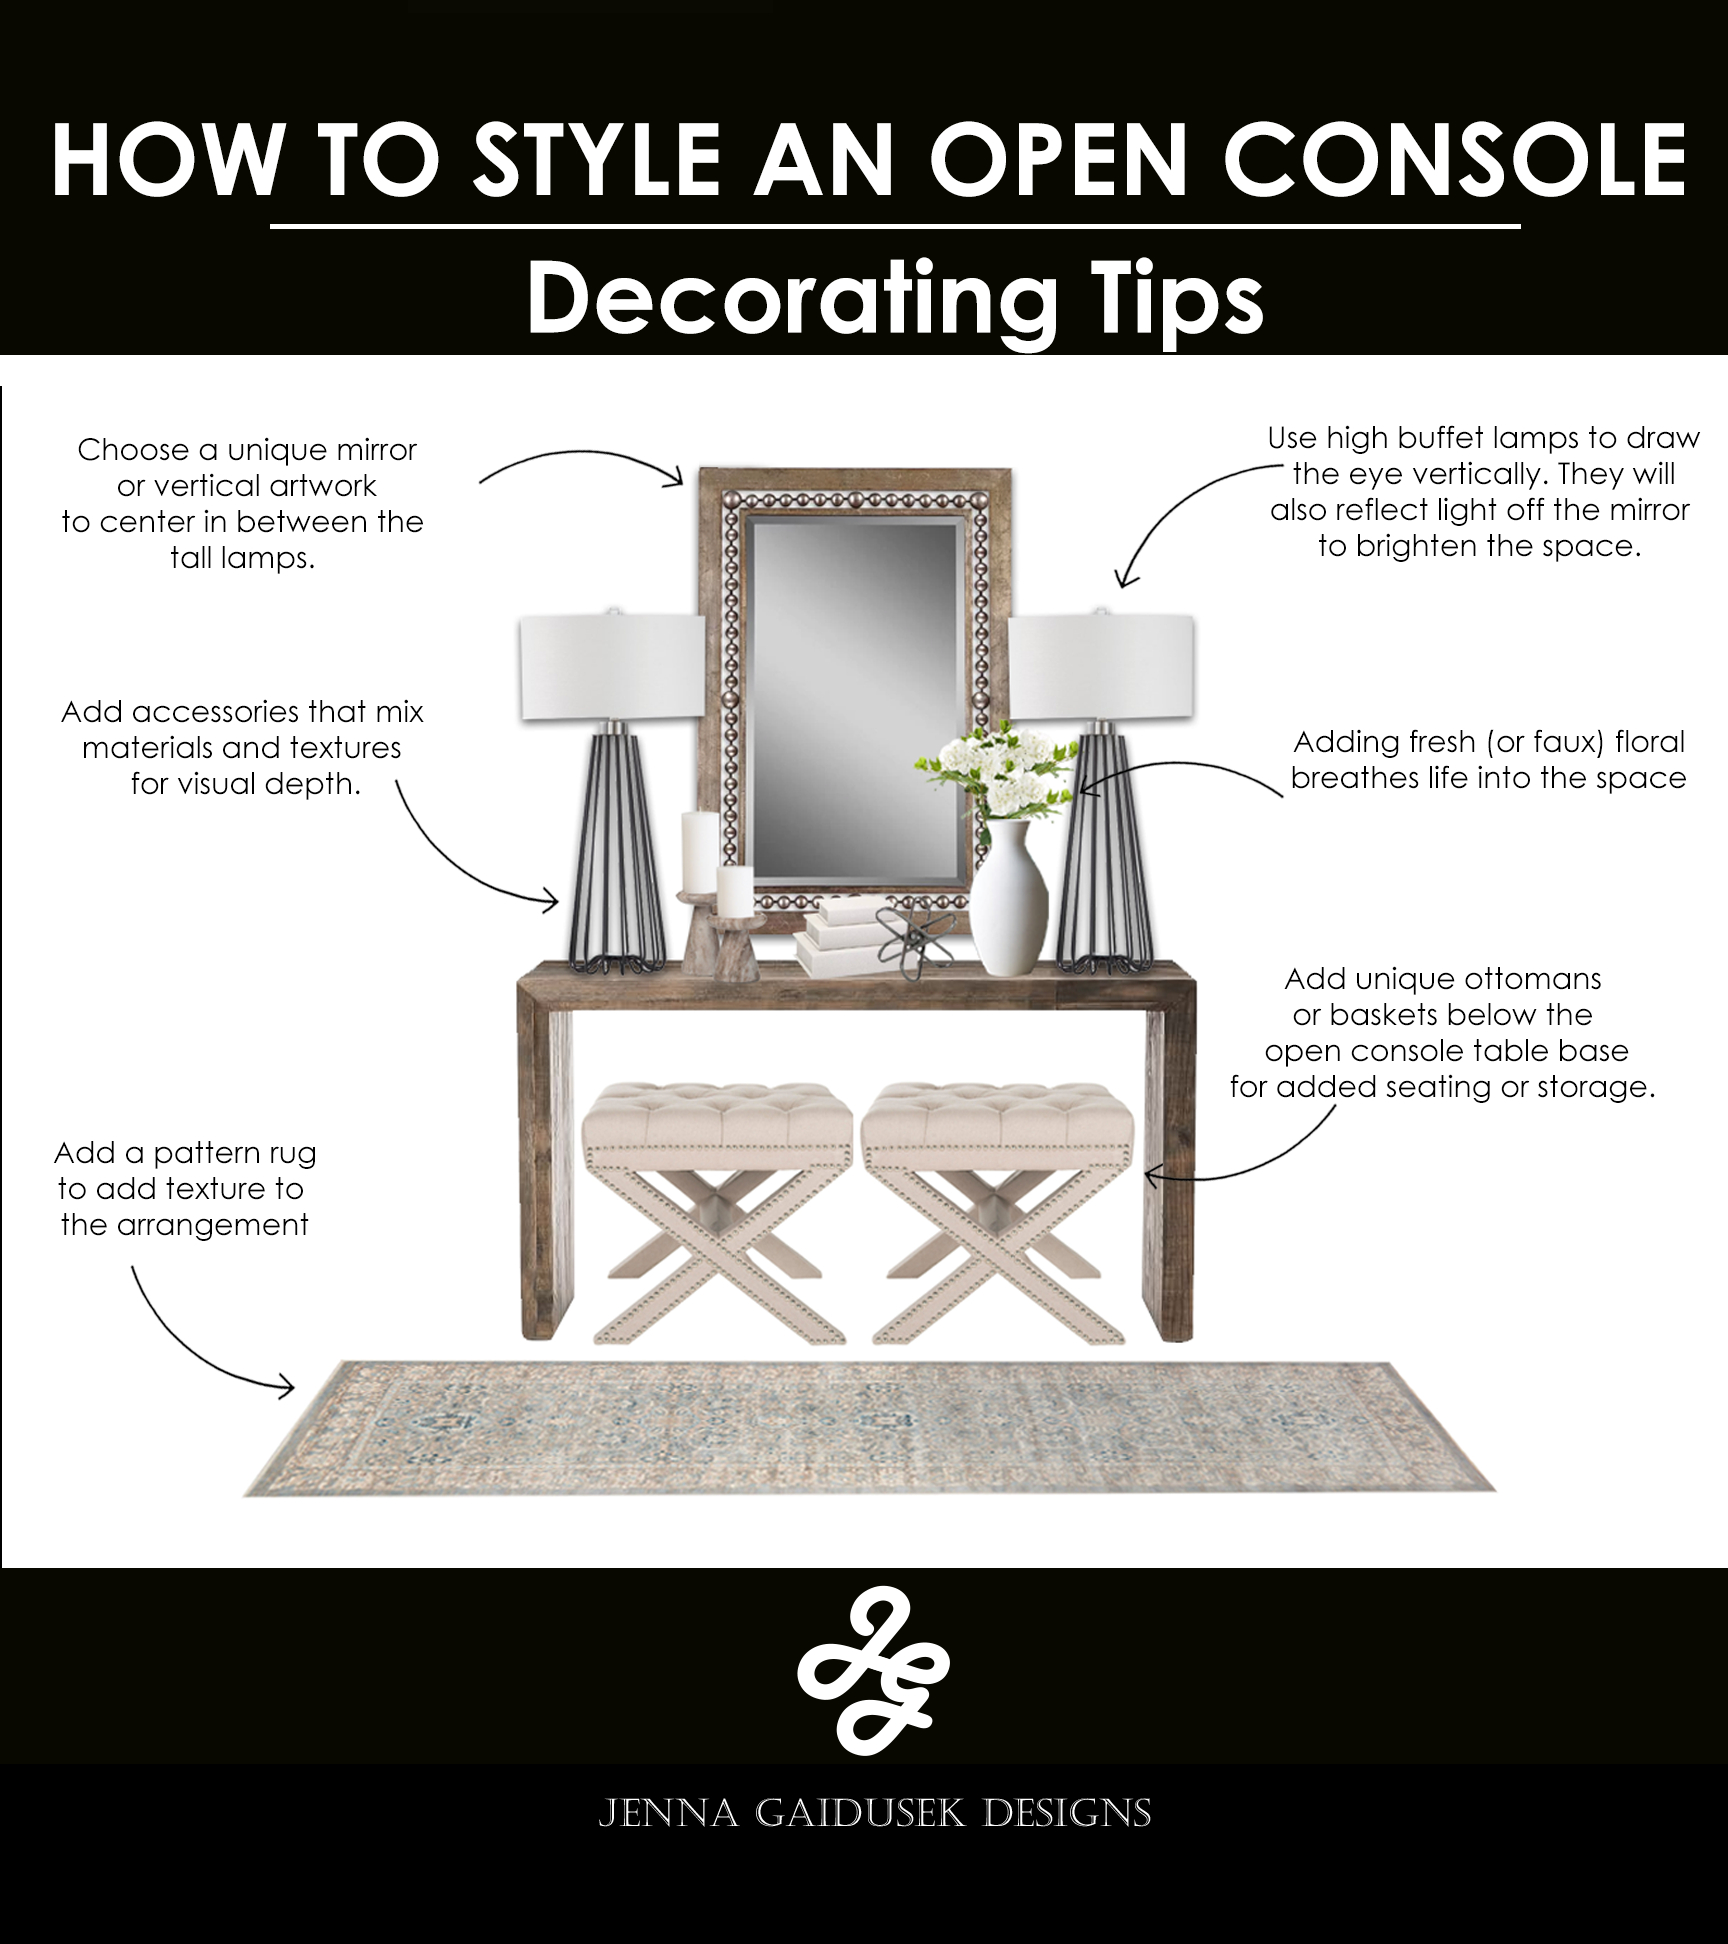 How To Decorate A Console Table Jenna Gaidusek Designs